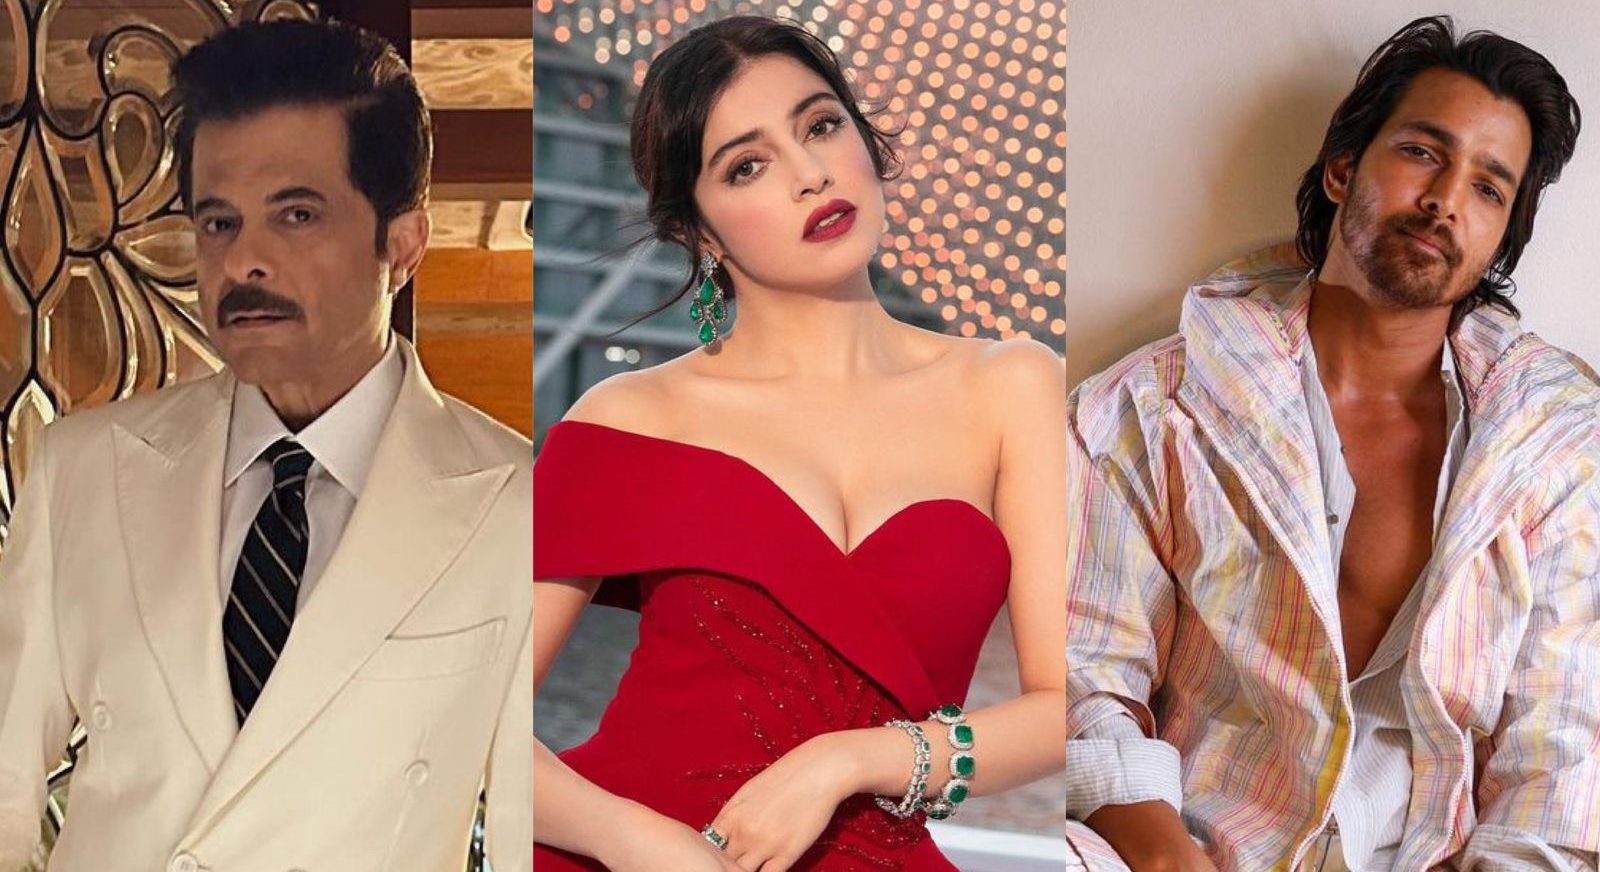 Anil Kapoor, Divya Khosla Kumar and Harshvardhan Rane’s film is a thriller, and there is no love triangle!